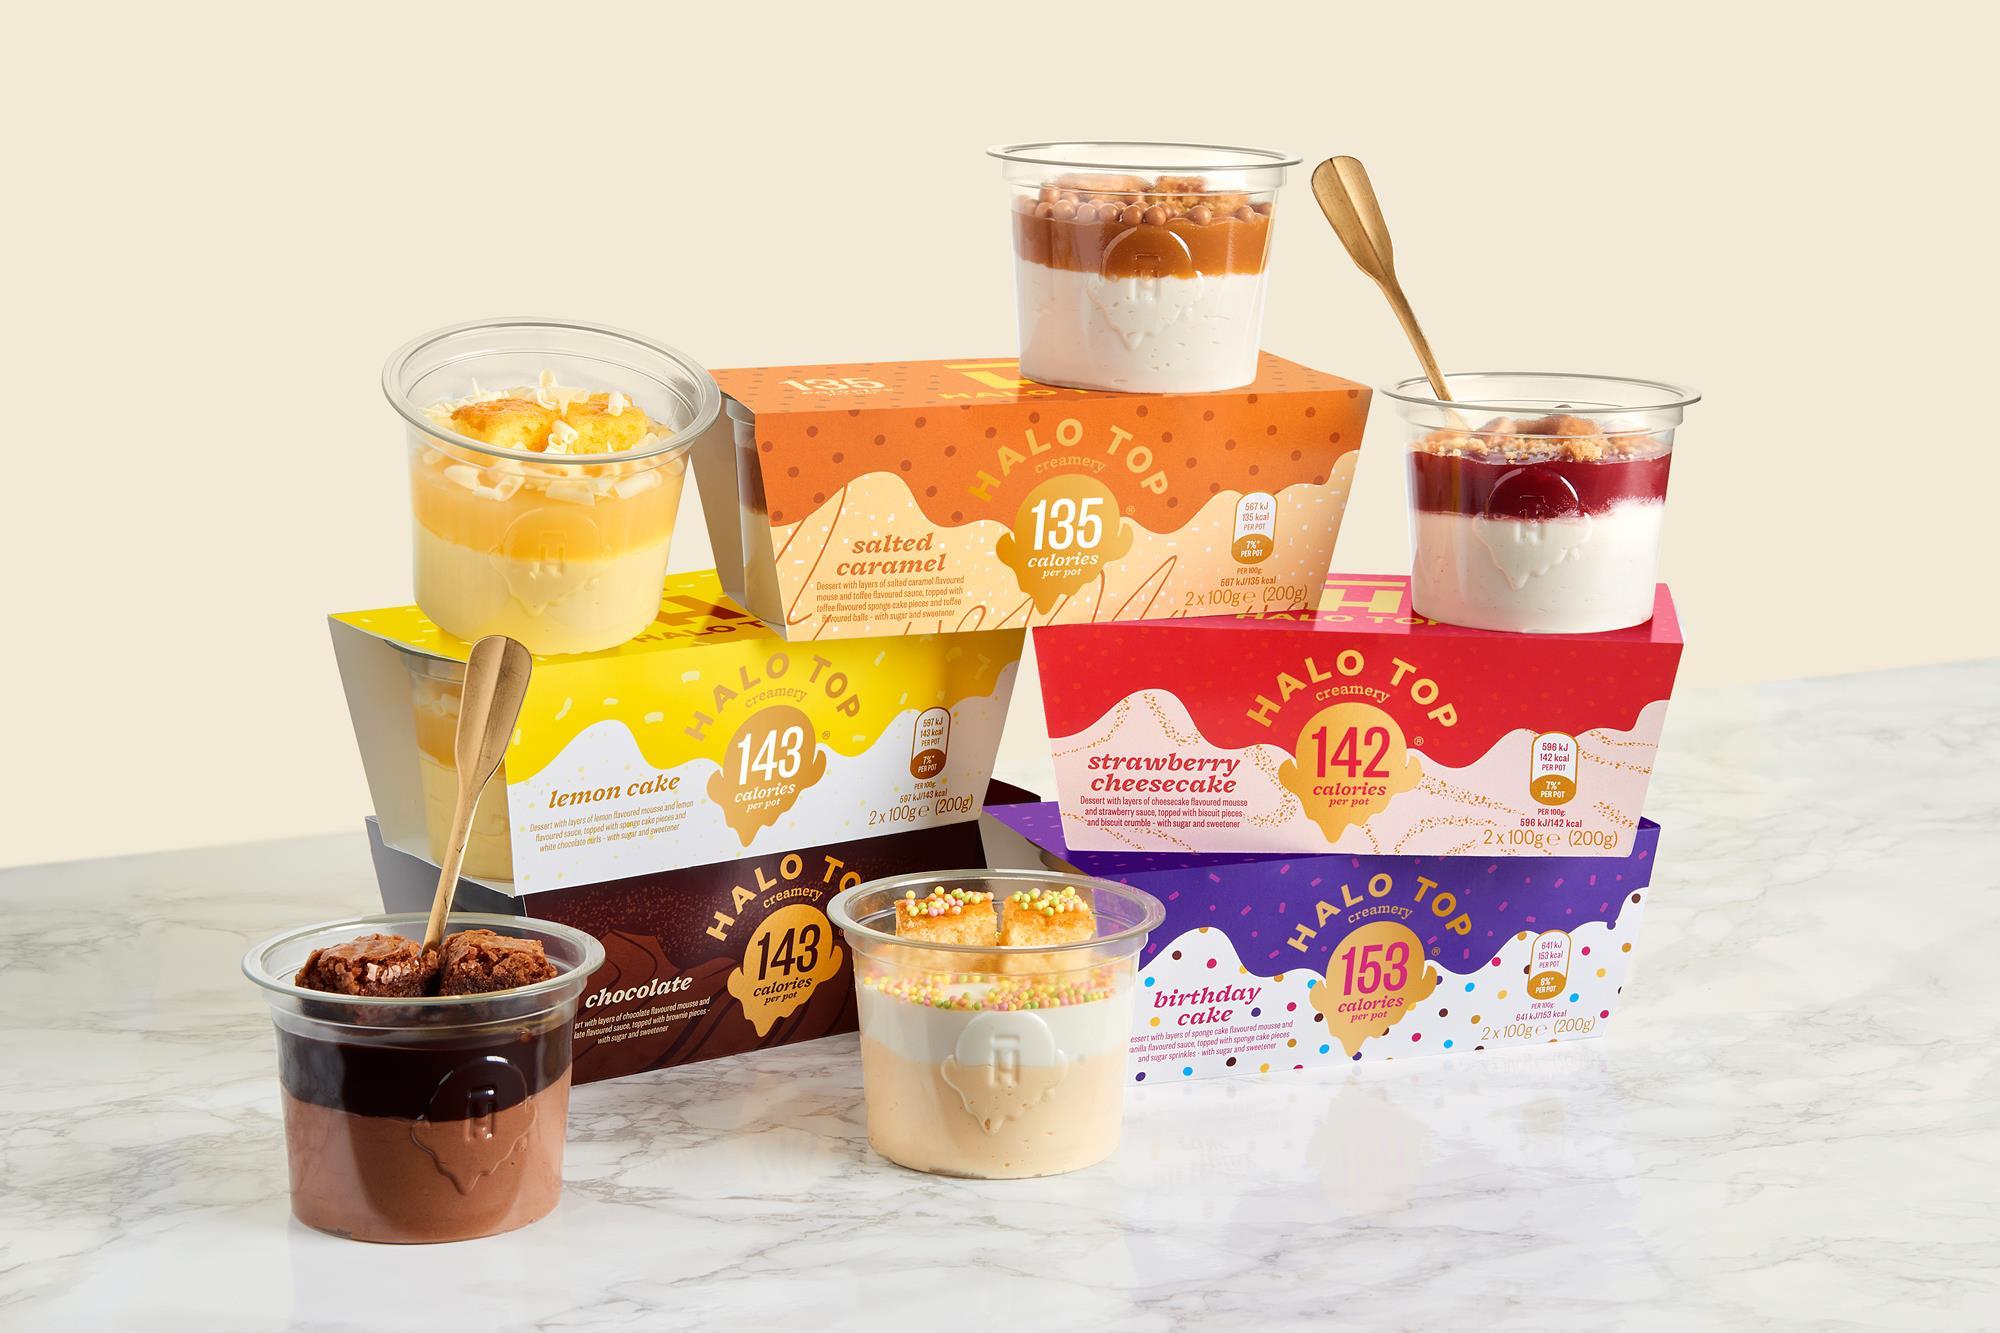 Halo Top expands beyond ice cream with dessert snack range   News ...